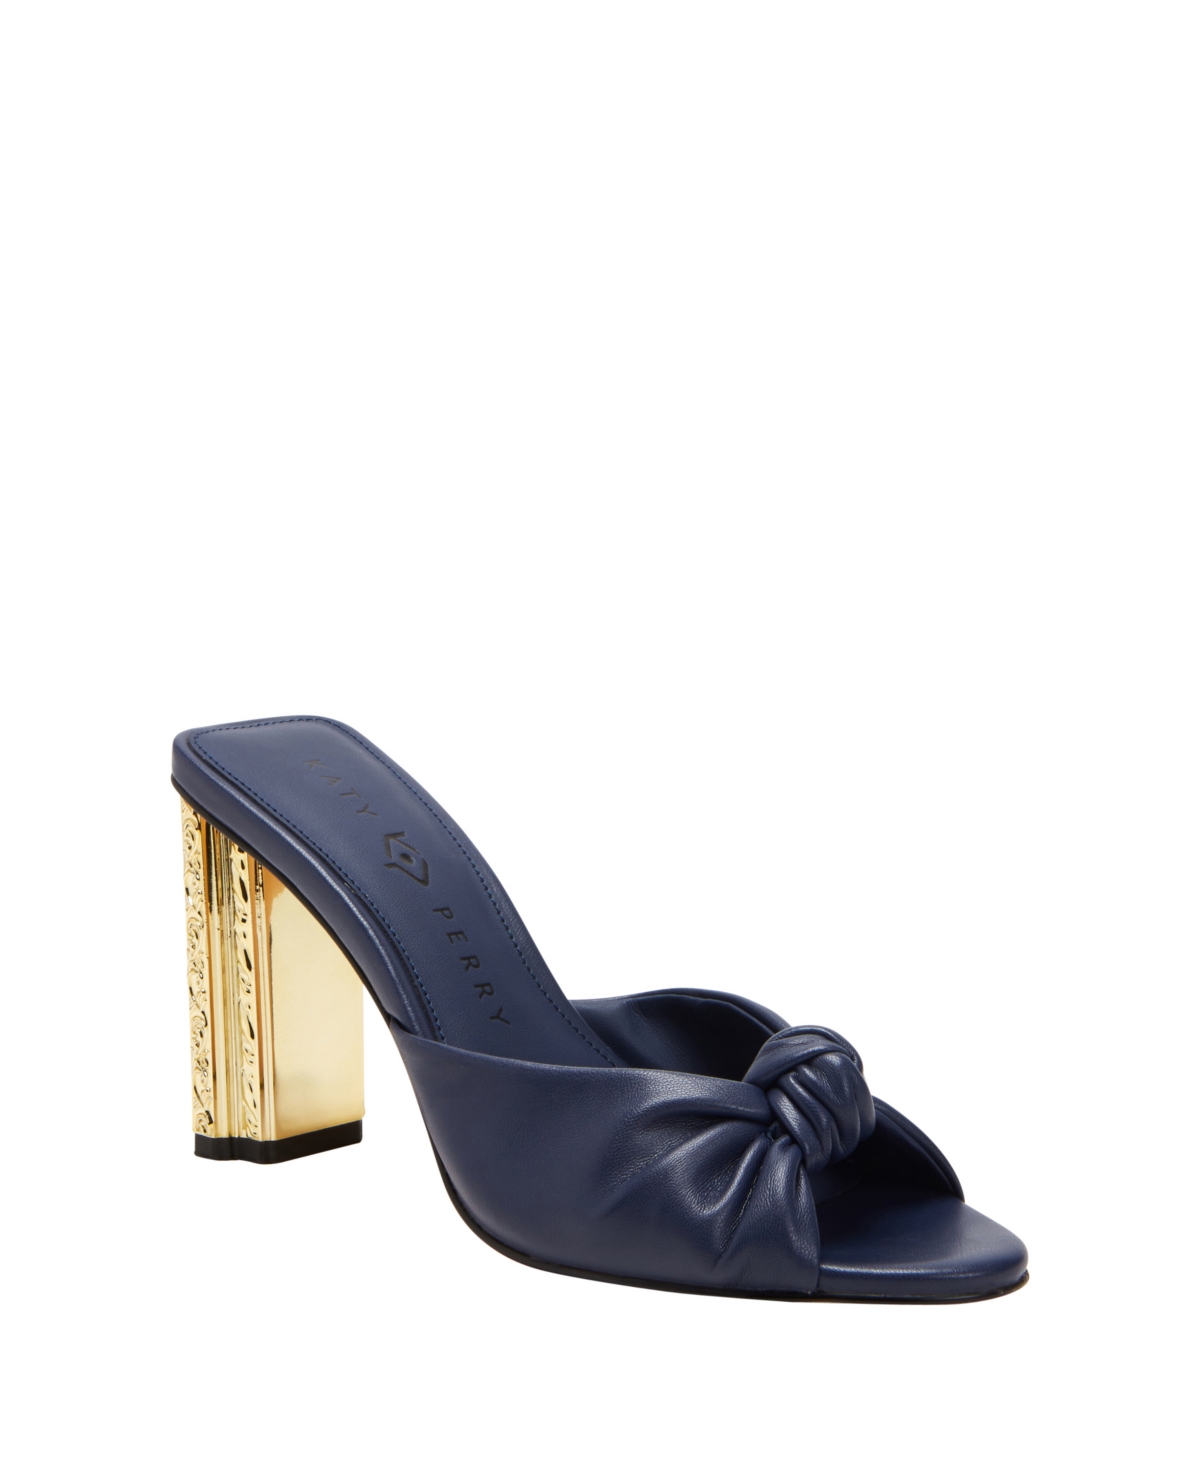 Katy Perry Women's Framing Block Heel Knotted Sandals In Midnight Blue